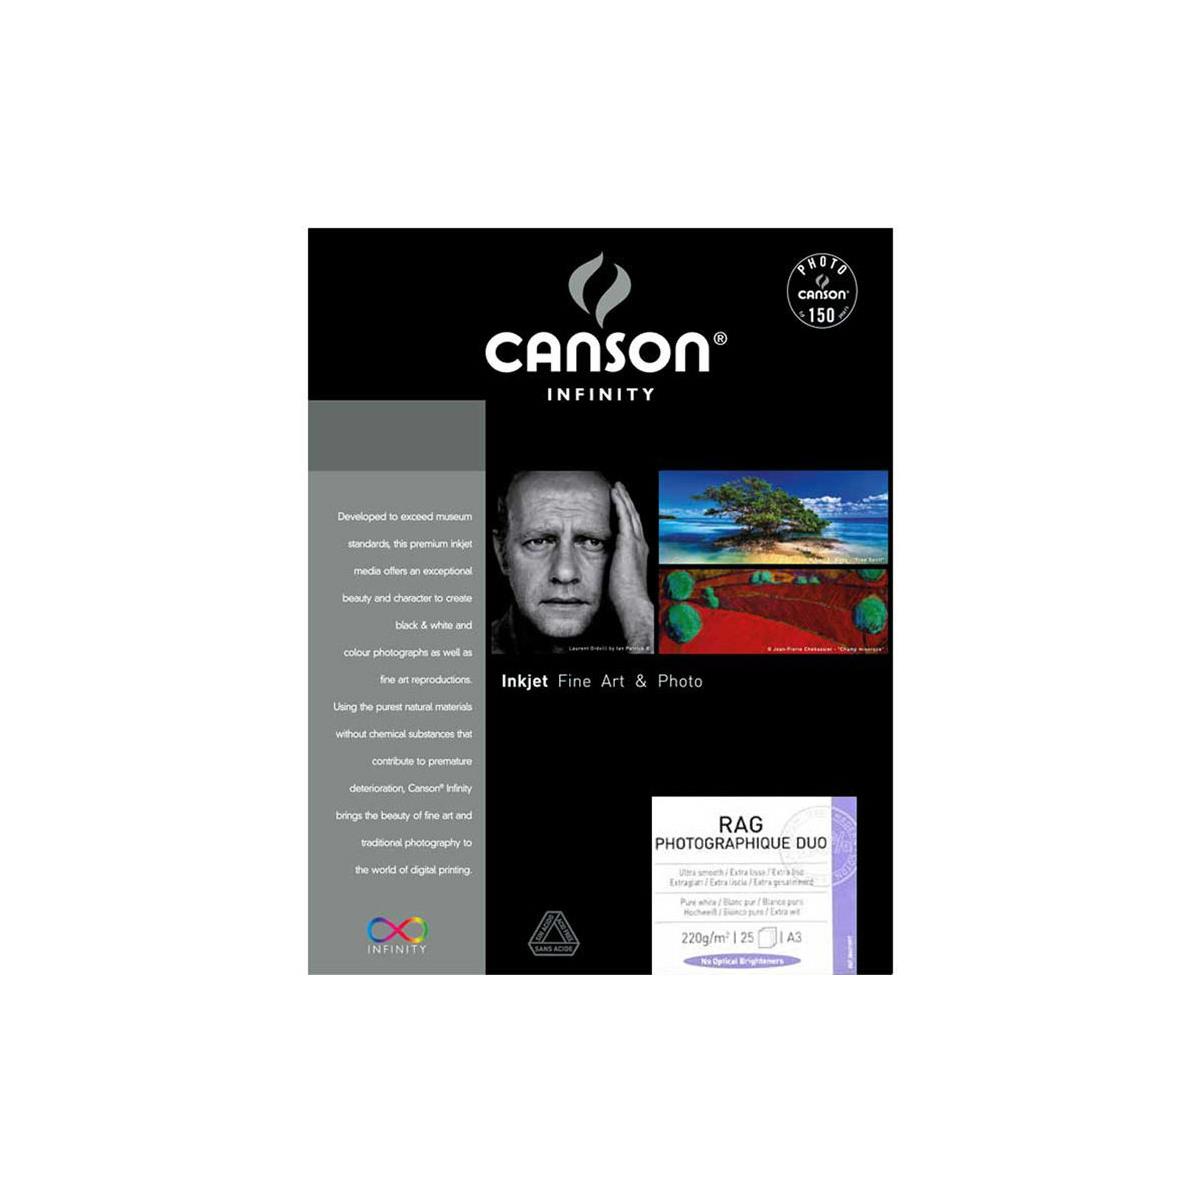 Image of Canson Infinity Rag graphique Duo Photo Paper (13x19&quot;)